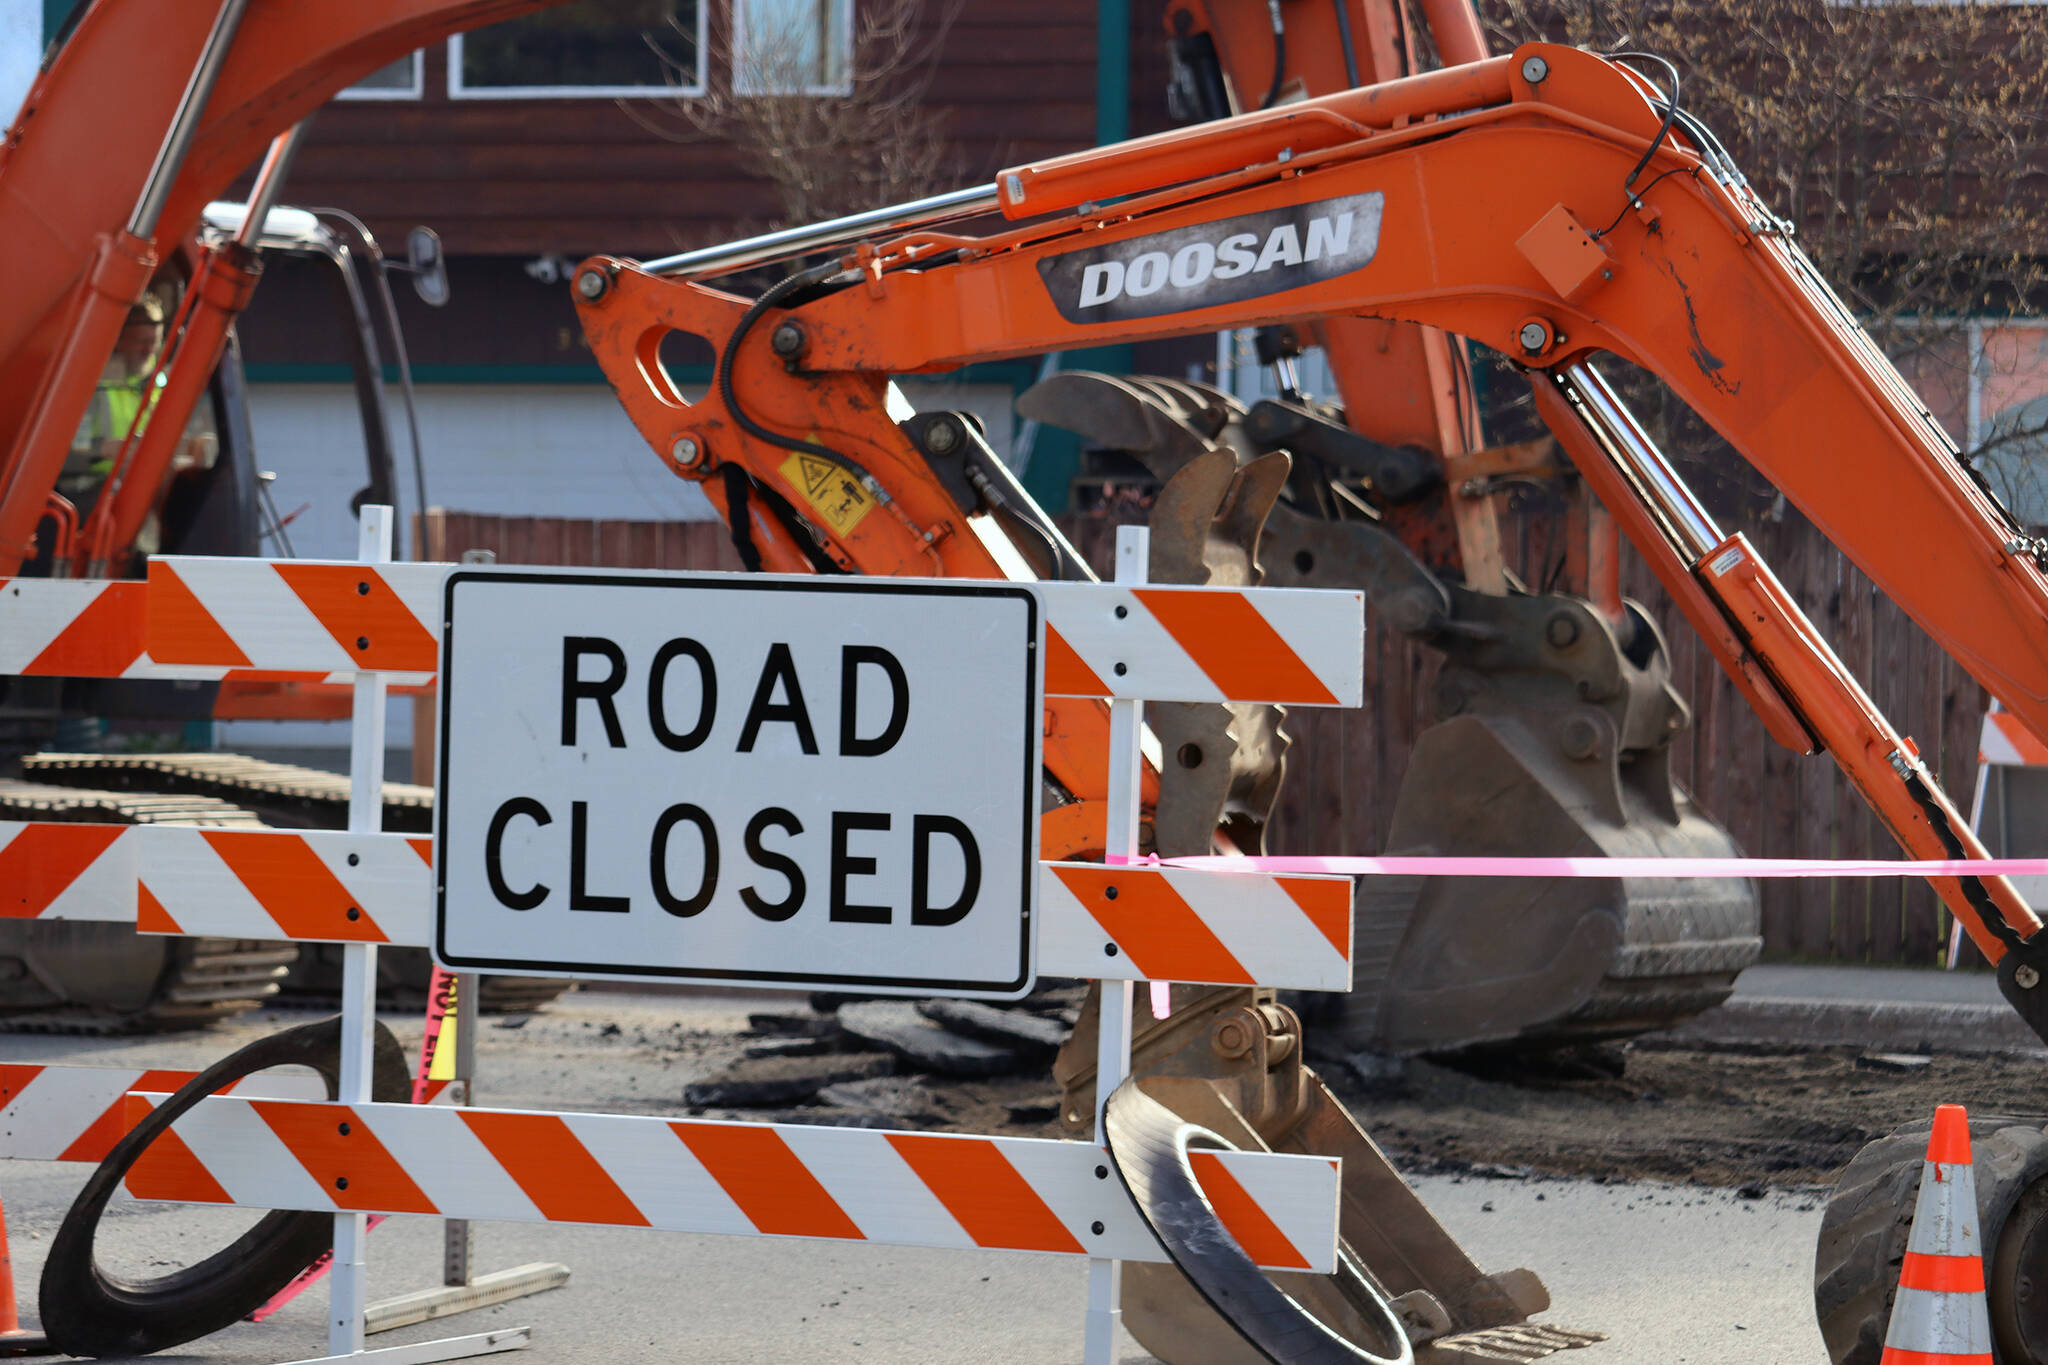 There will be substantial disruptions to traffic on Tongass Boulevard for the next week as a reconstruction project takes place. (Ben Hohenstatt / Juneau Empire)